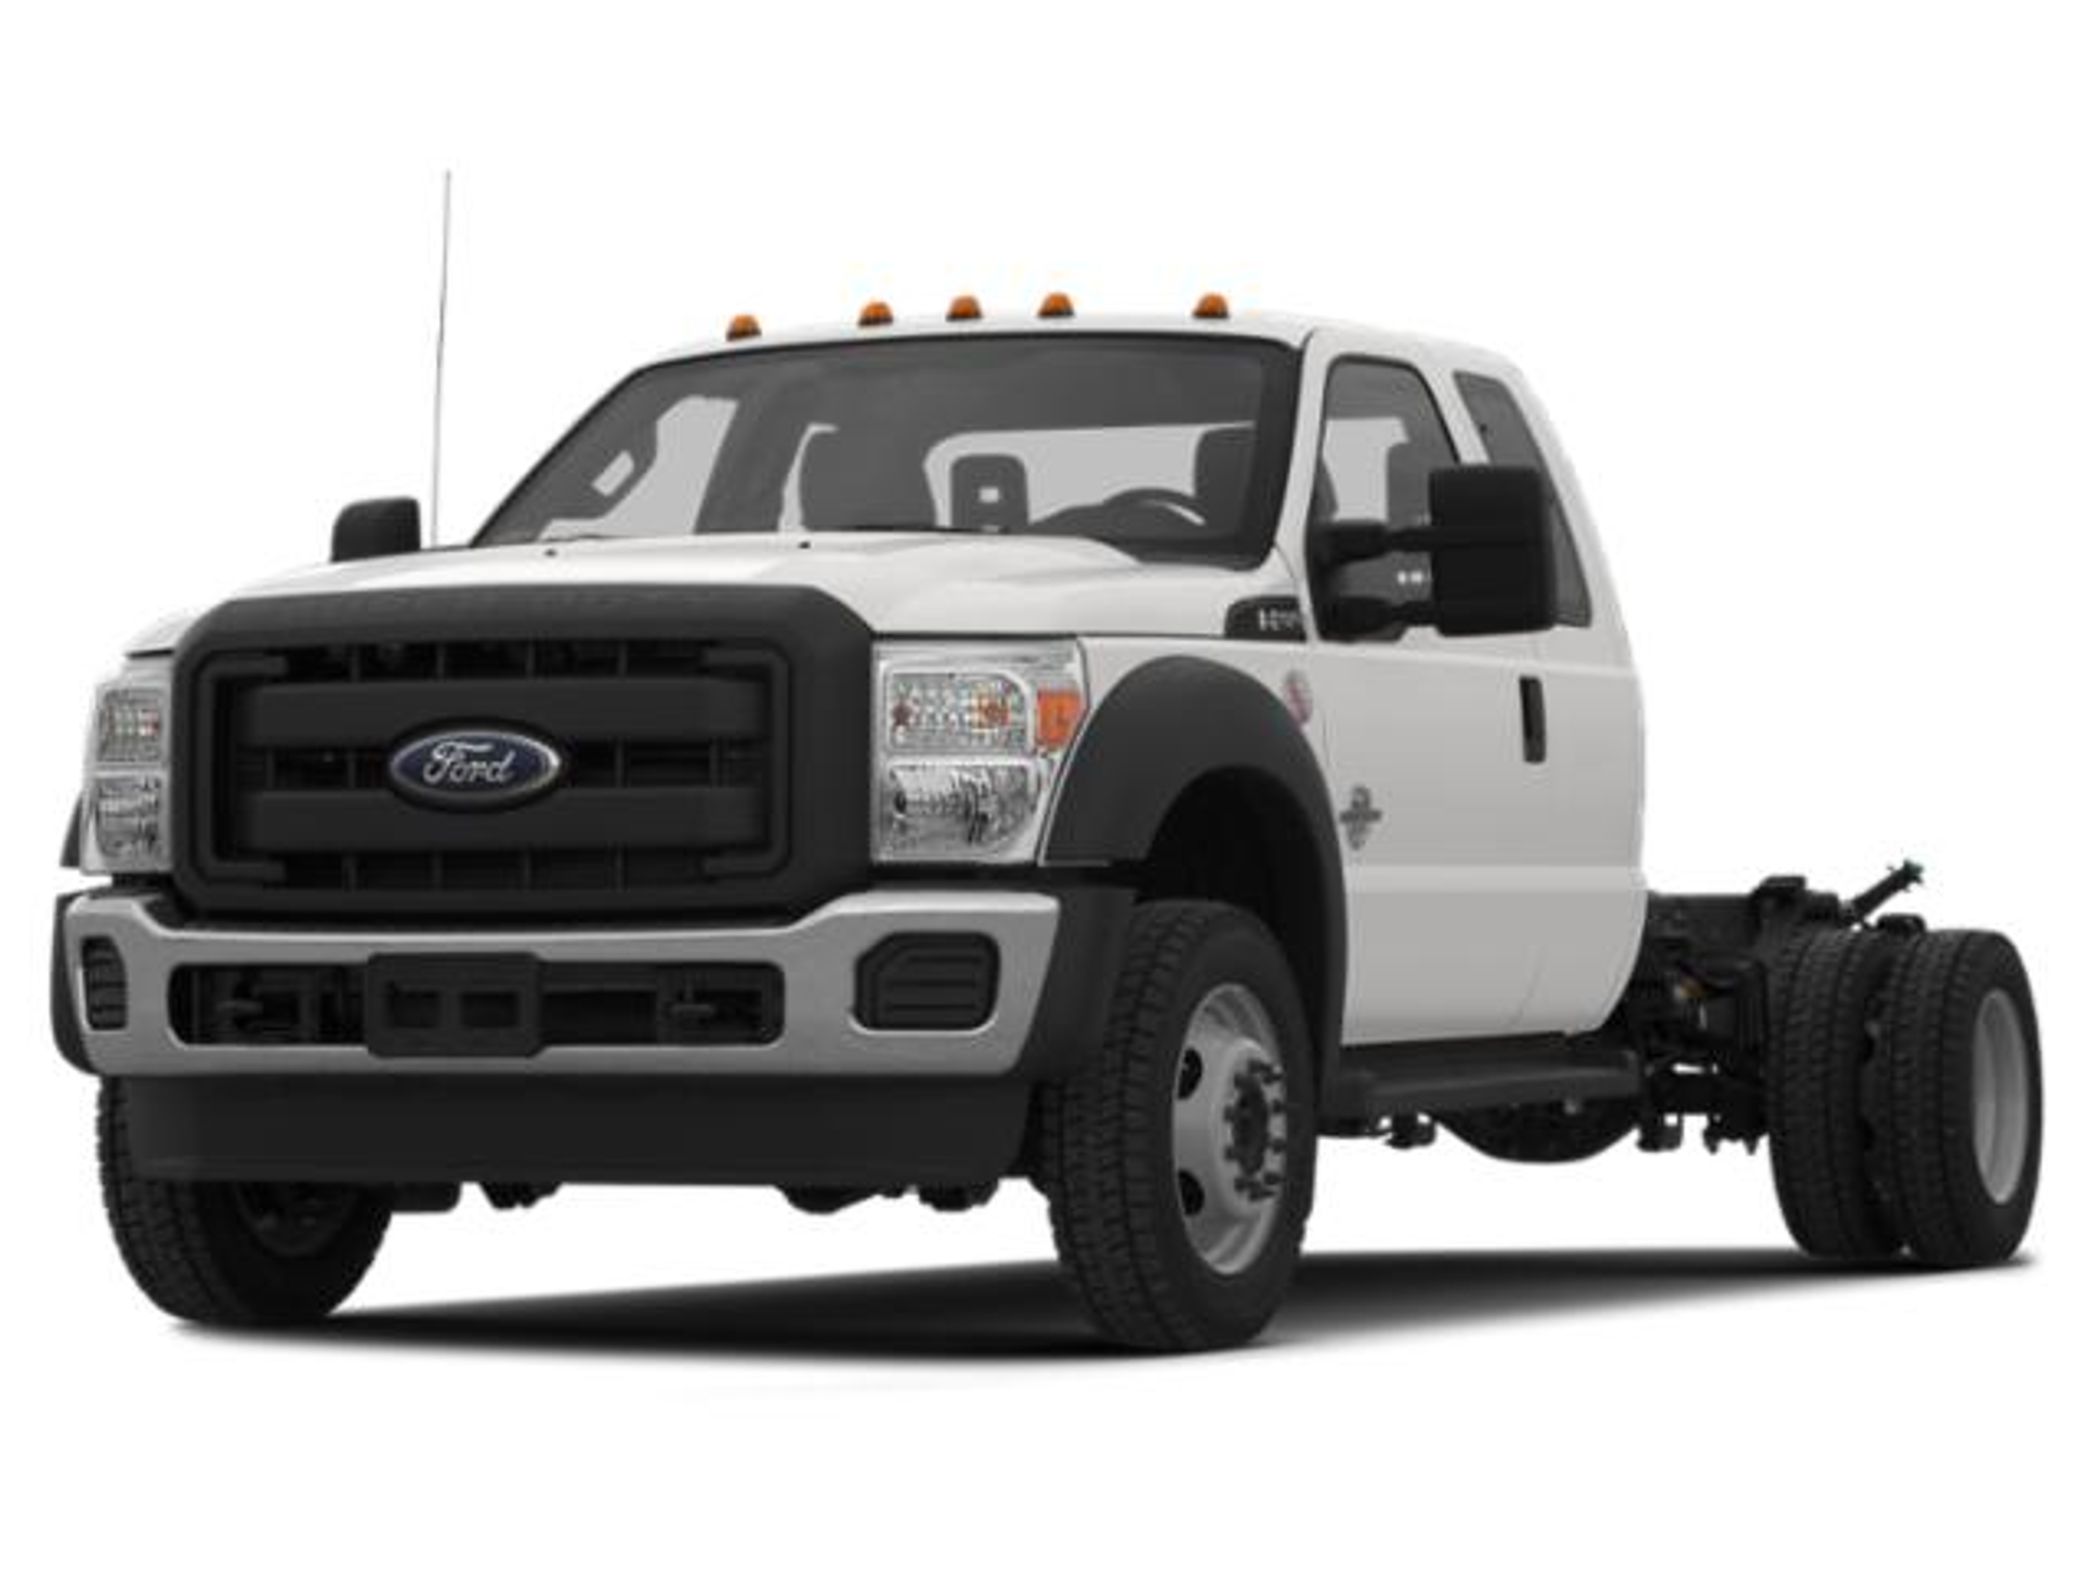 2013 Ford F-550